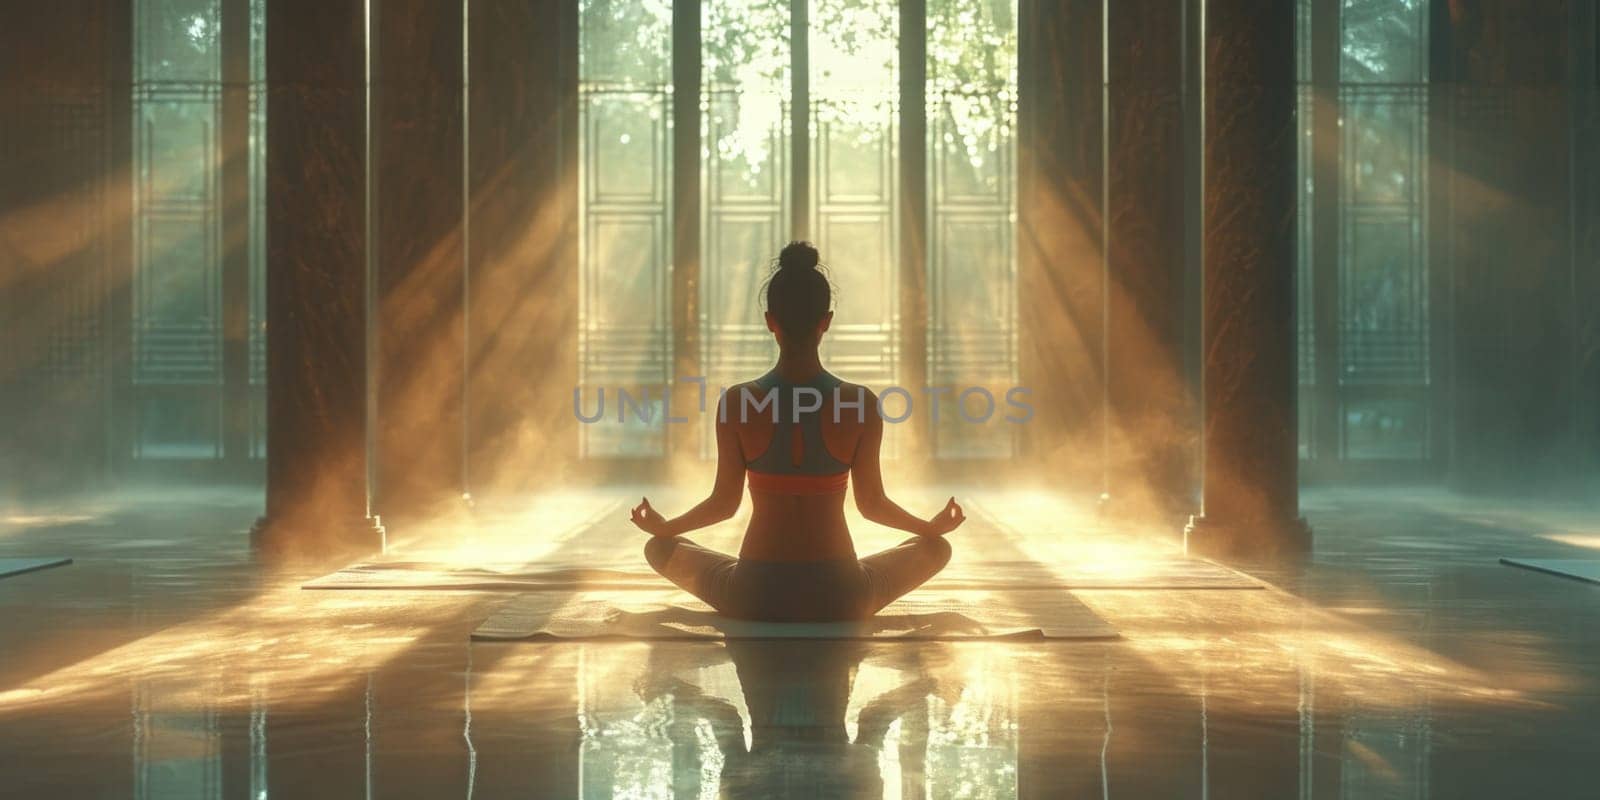 An Asian woman sitting in a lotus position in front of a window.